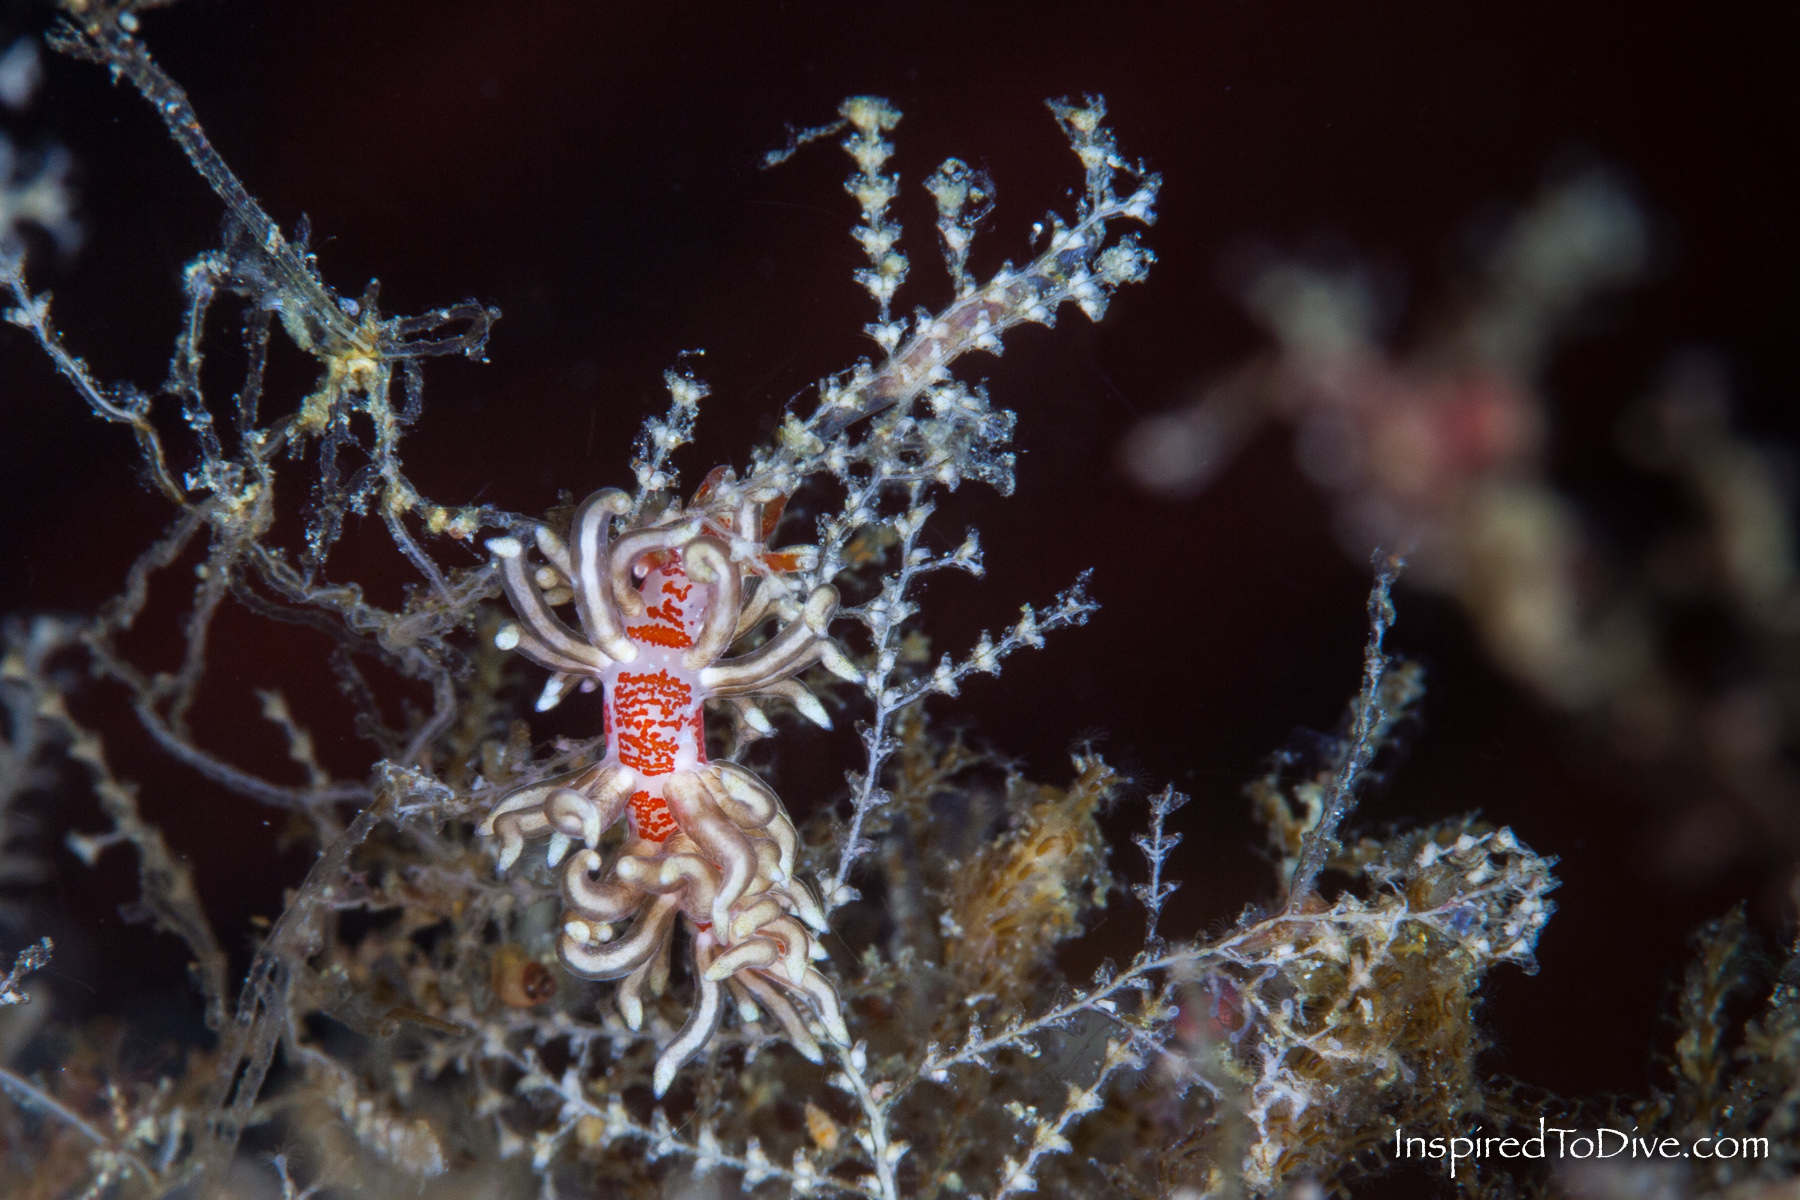 Trinchesia sp. - the rasta nudibranch from New Zealand